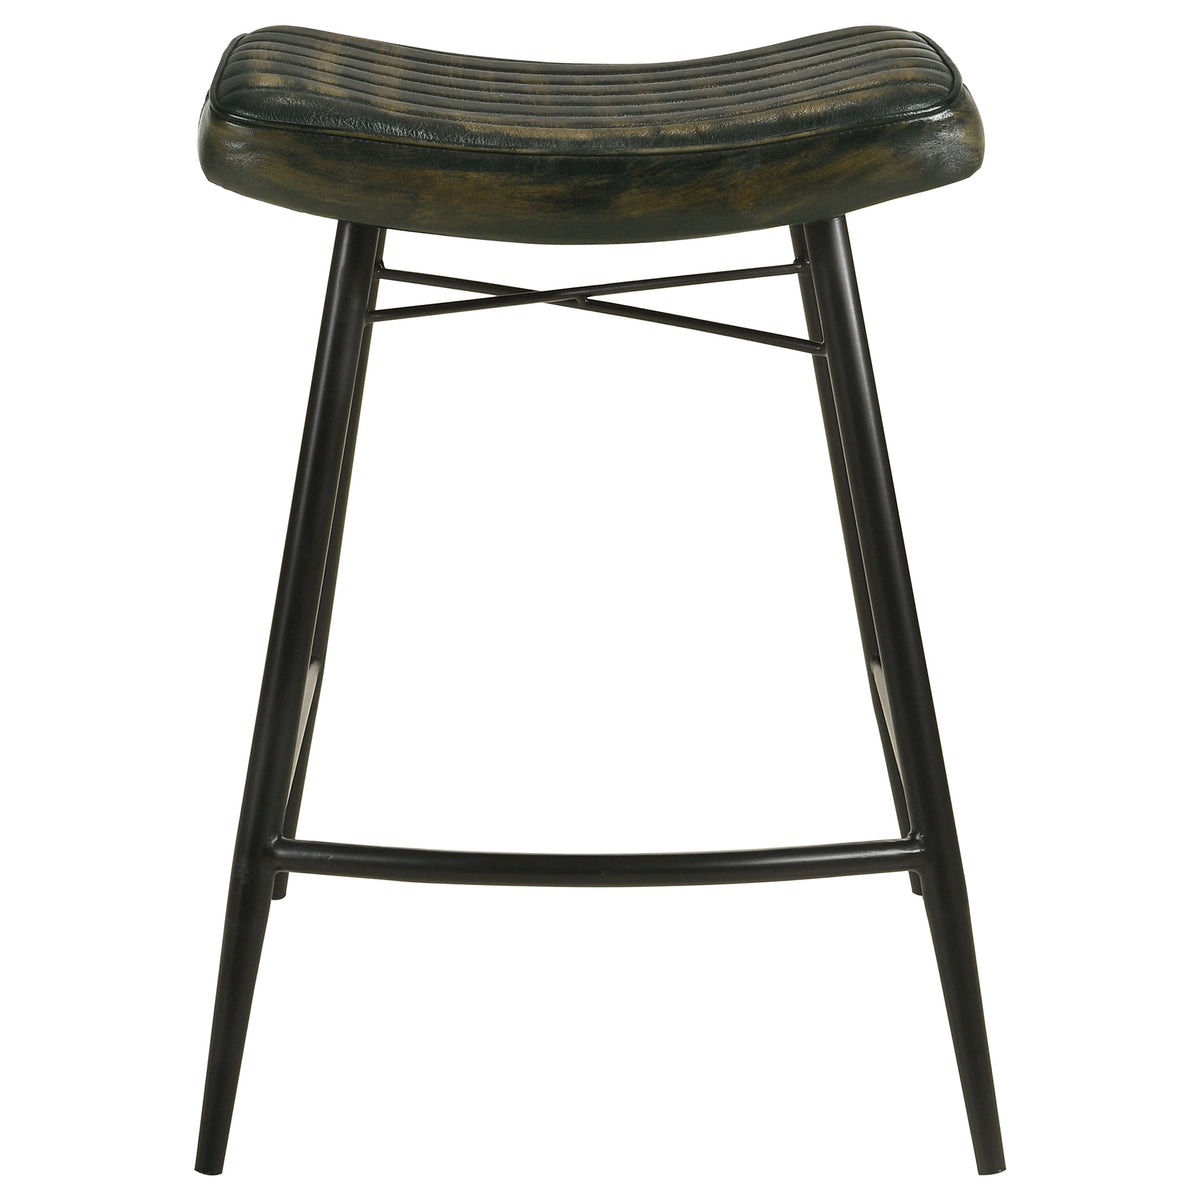 Bayu Leather Upholstered Saddle Seat Backless Counter Height Stool (Set of 2) - Half Price Furniture